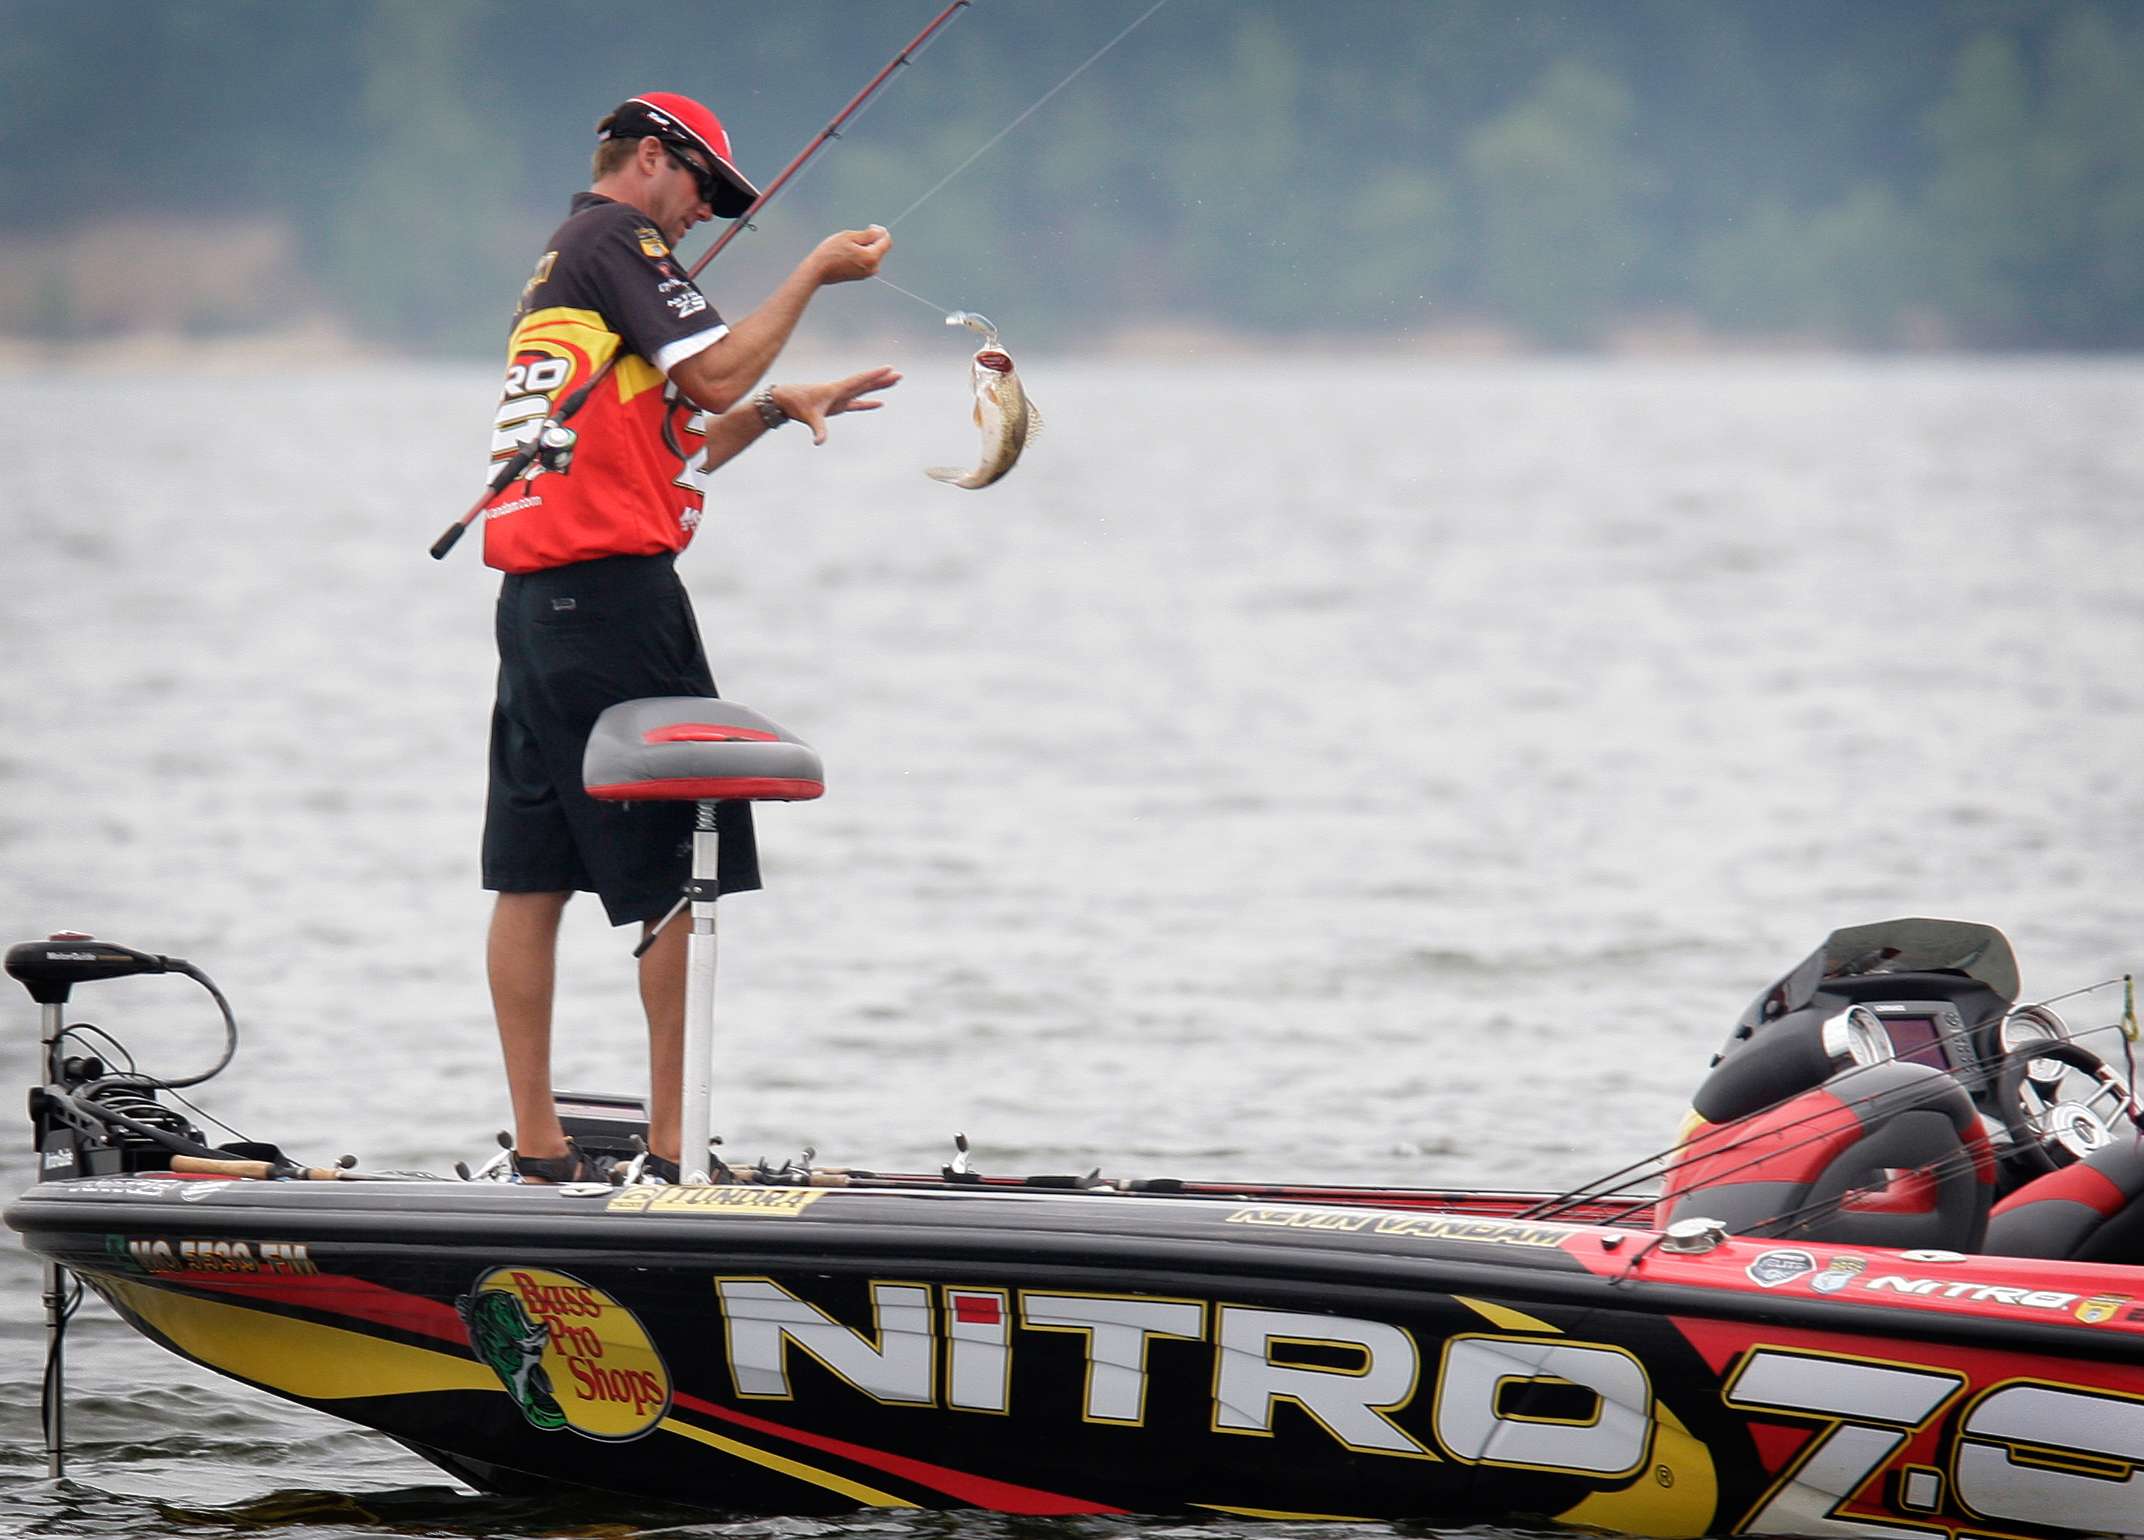 At the 2008 Bluegrass Brawl, Kevin VanDam battled to top the leaderboard, and when he won the event, he said, âMan, what a relief.â Later that year he took home his fourth Angler of the Year title.